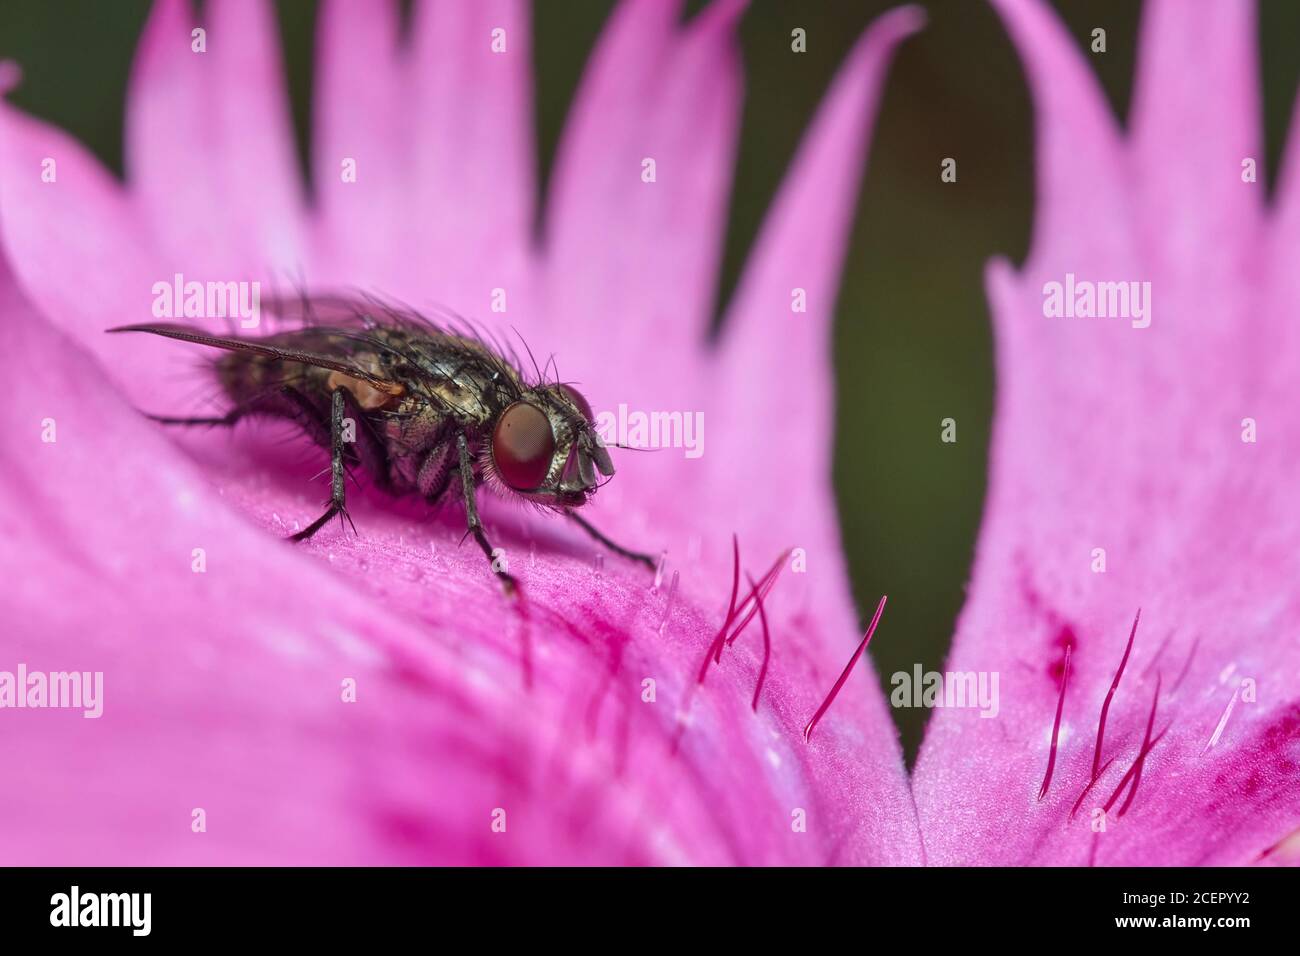 Housefly, Musca domestica, on a Feathered Pink Dianthus flower Stock Photo